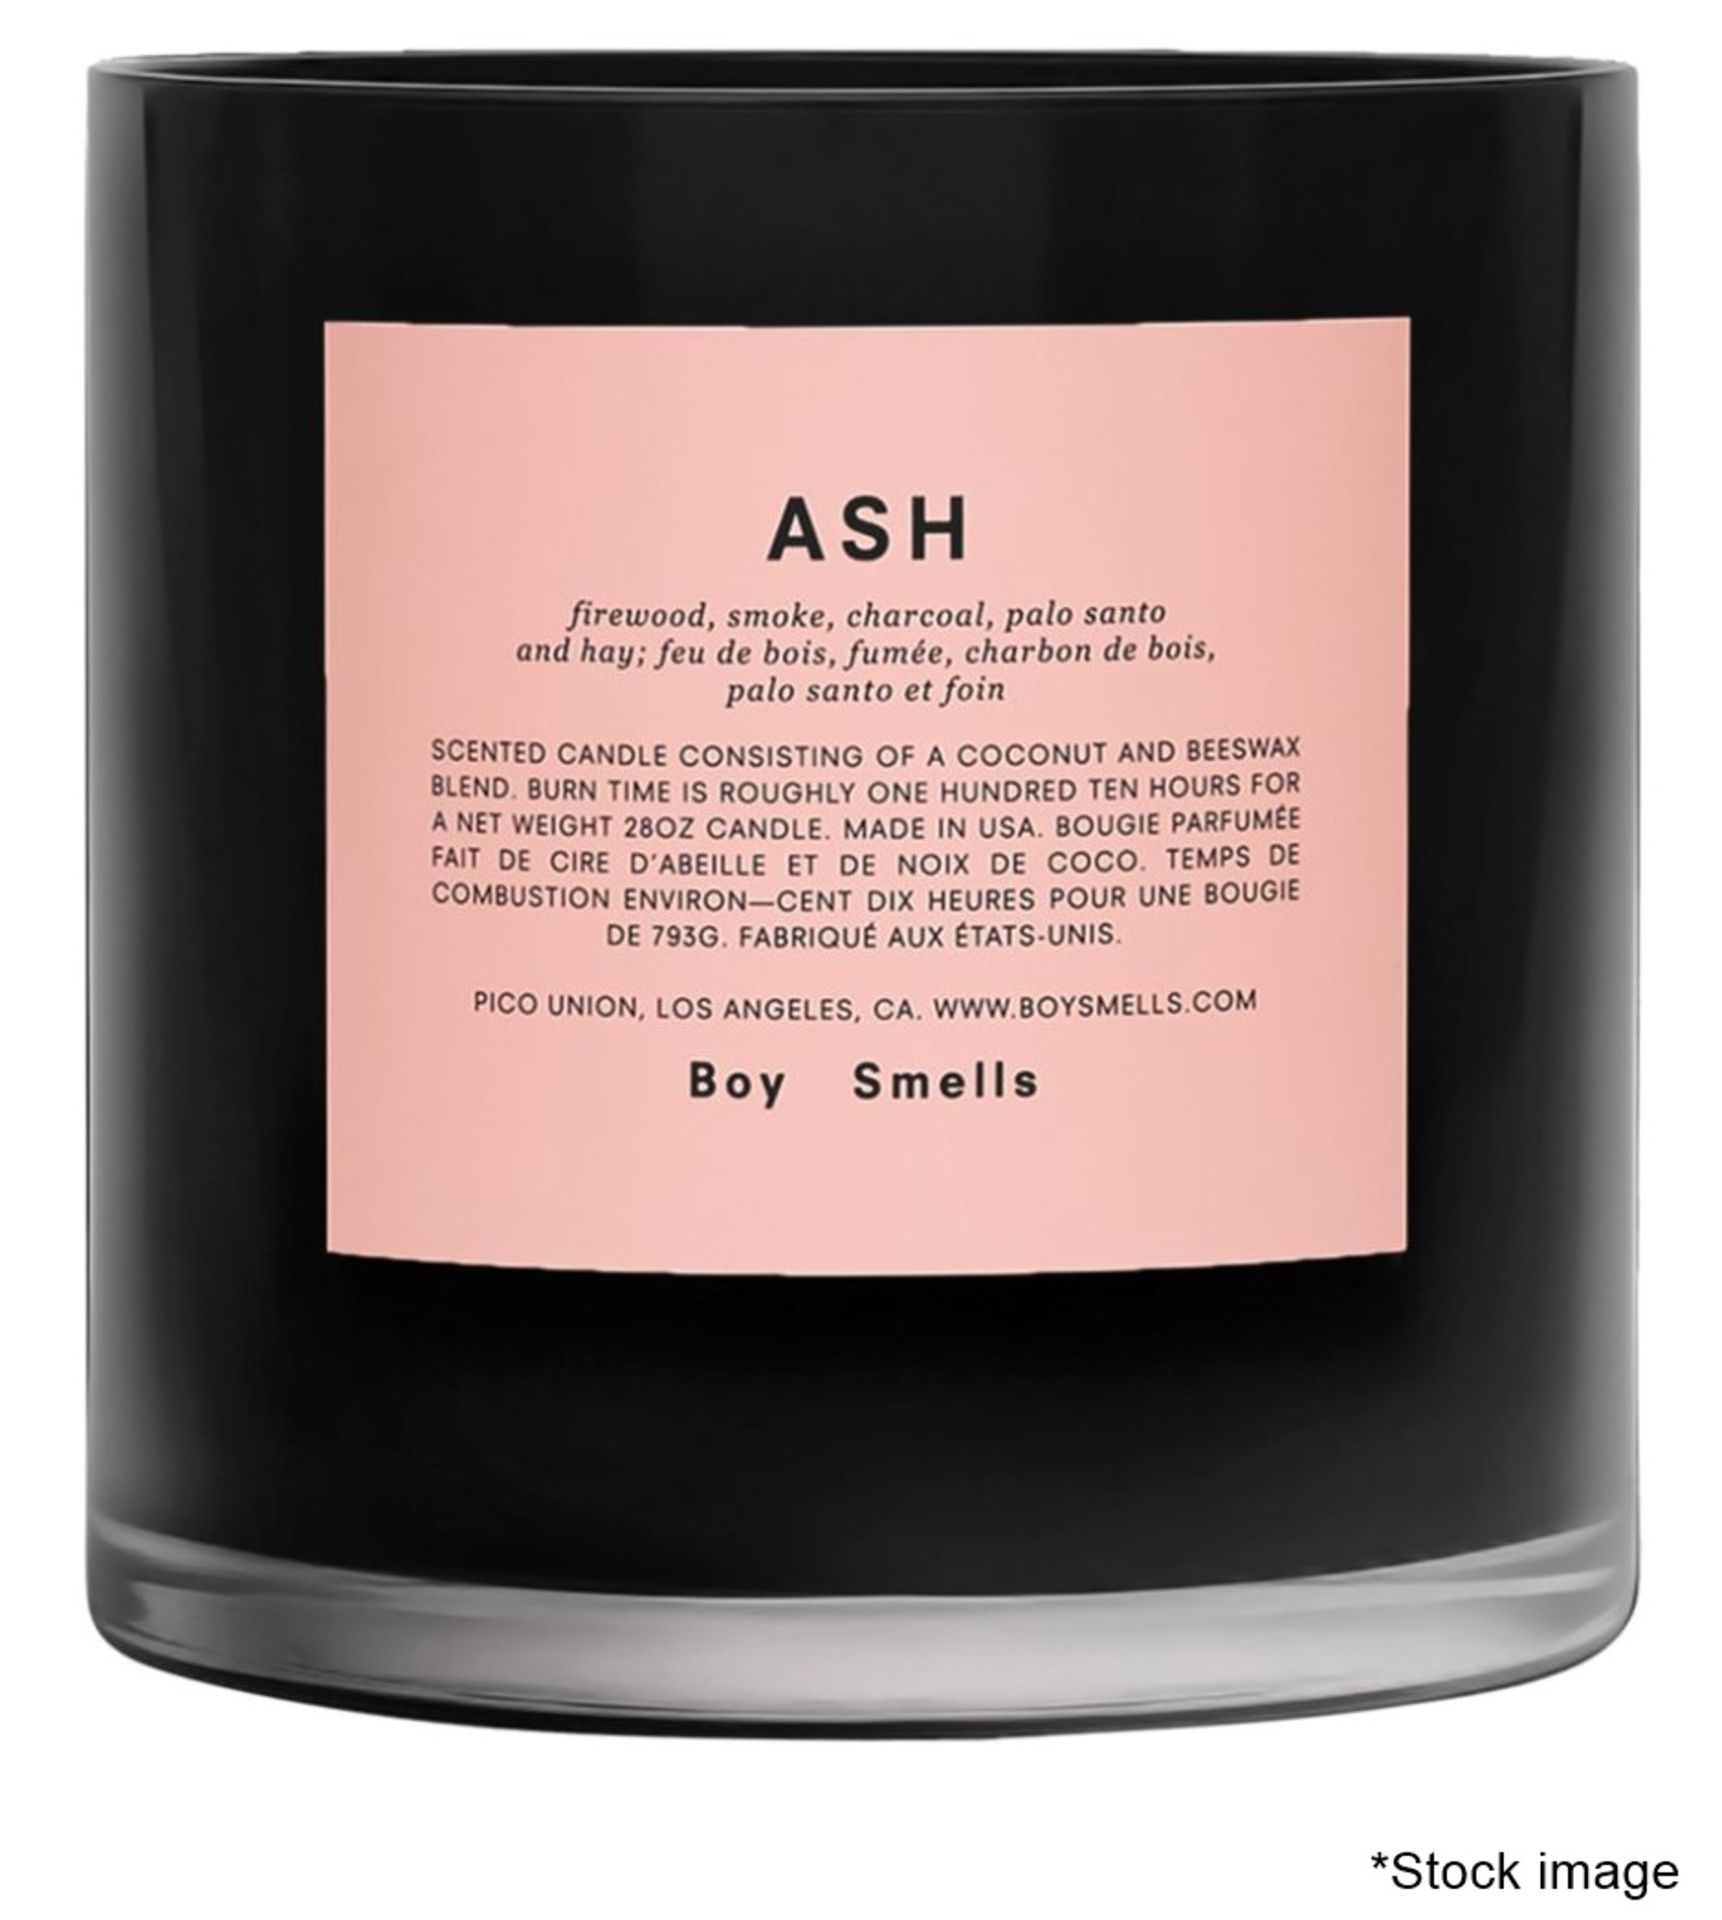 1 x BOY SMELLS 'Ash' Luxury Scented Candle (796g) - Original Price £120.00 - Unused Boxed Stock